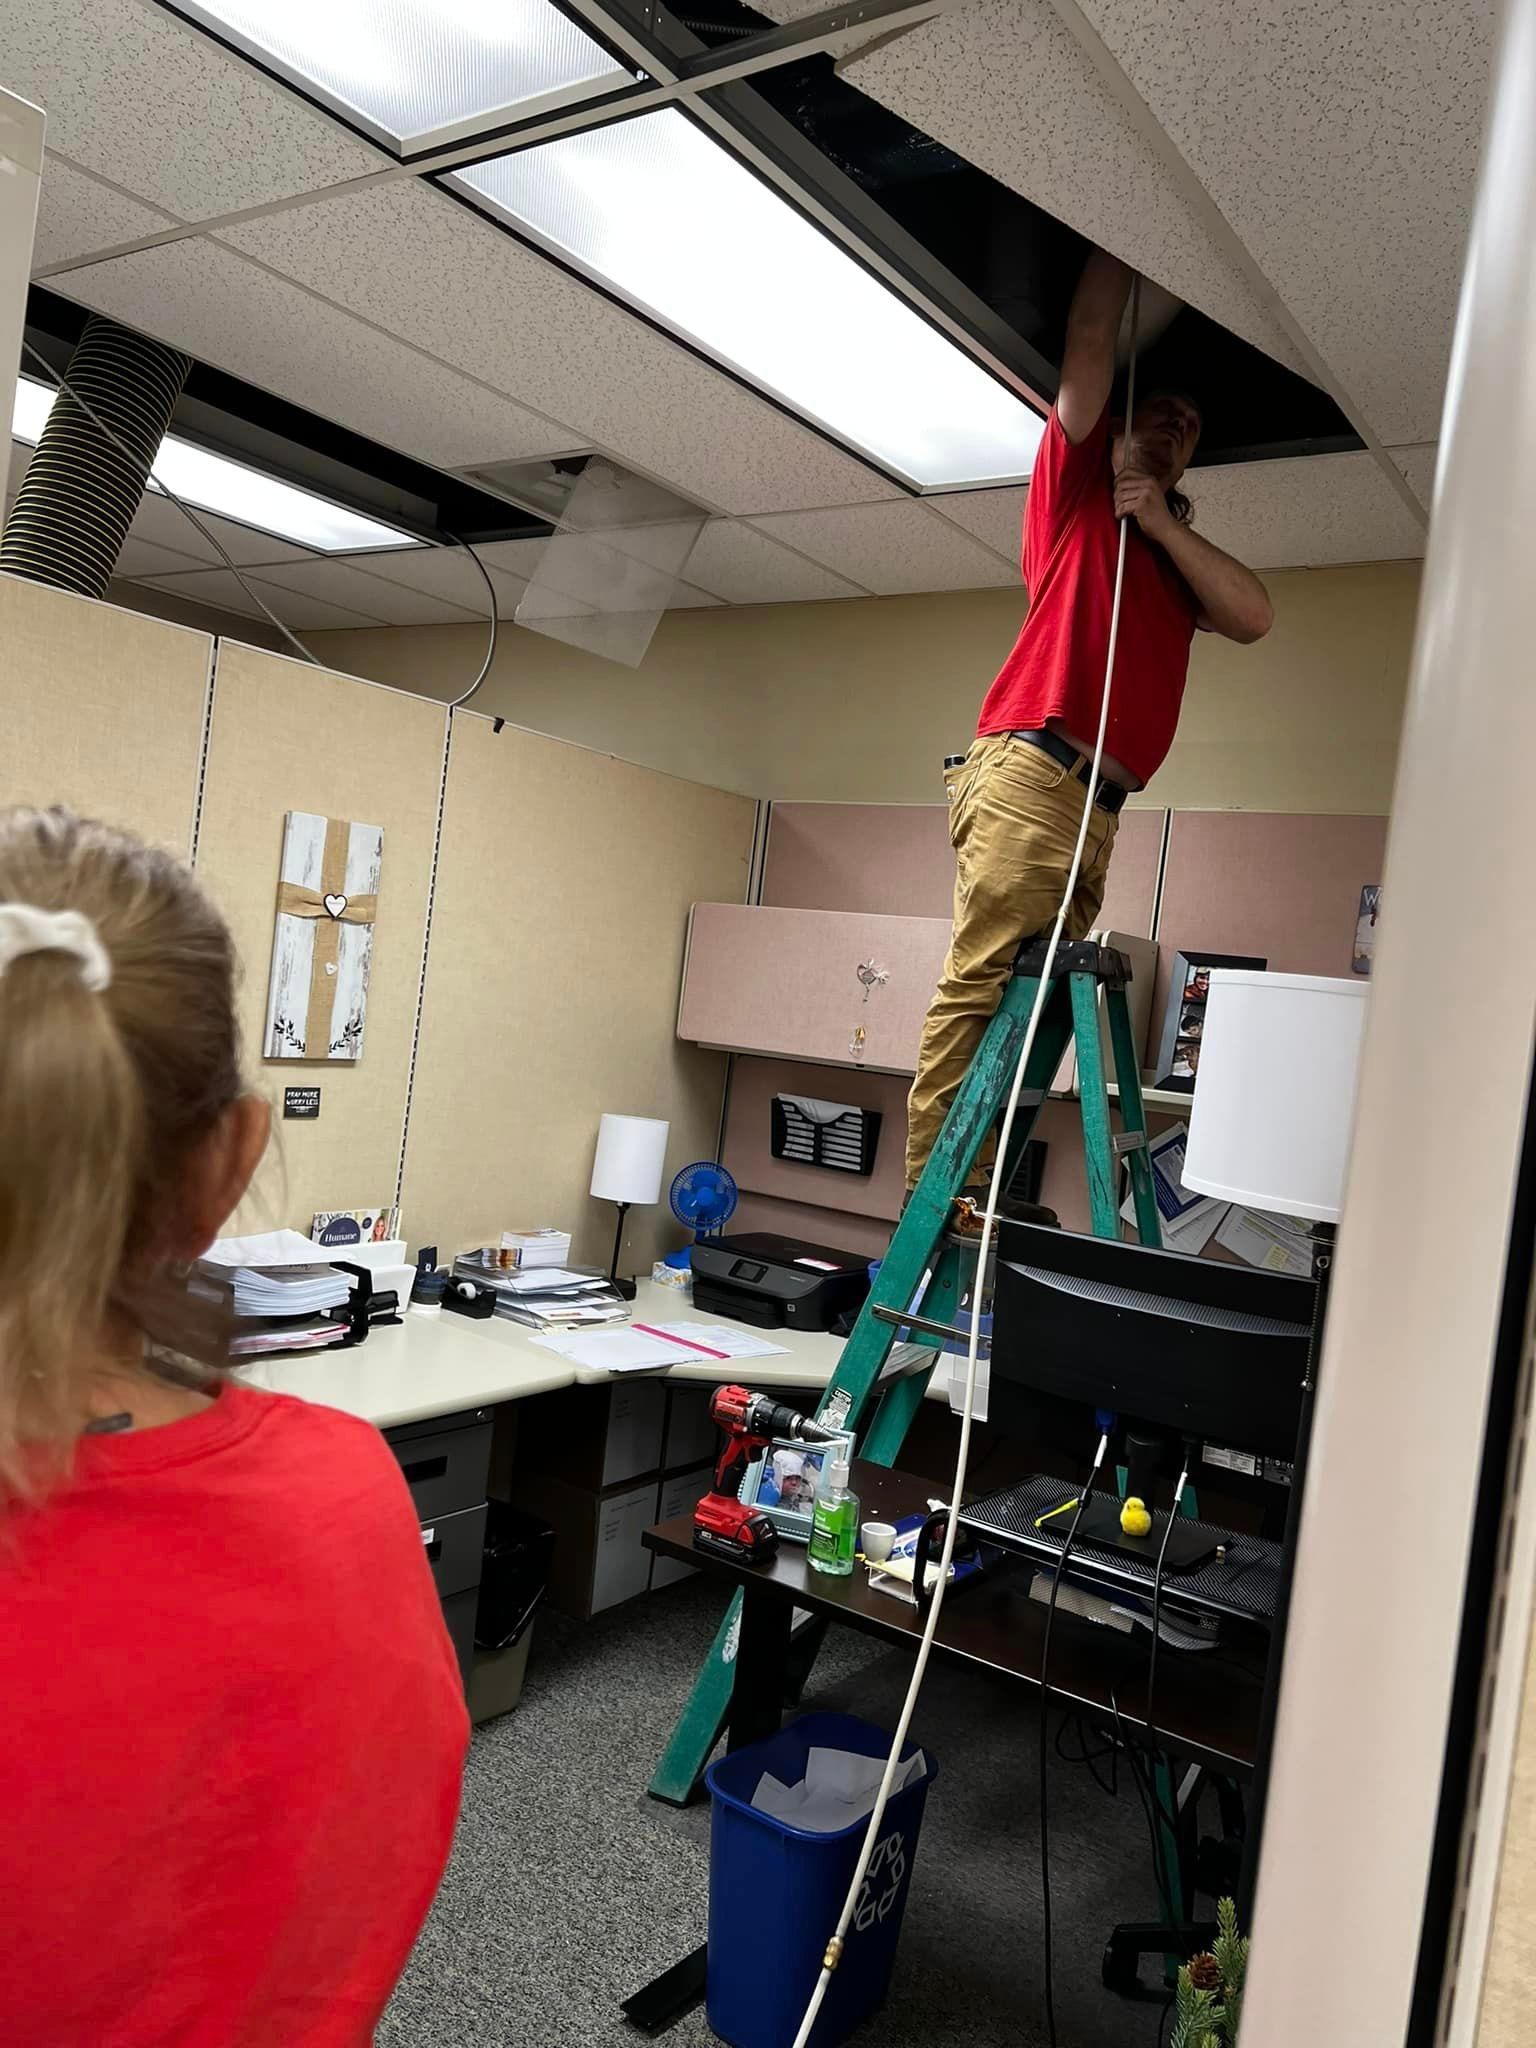 A man in a red shirt is standing on a ladder in an office .